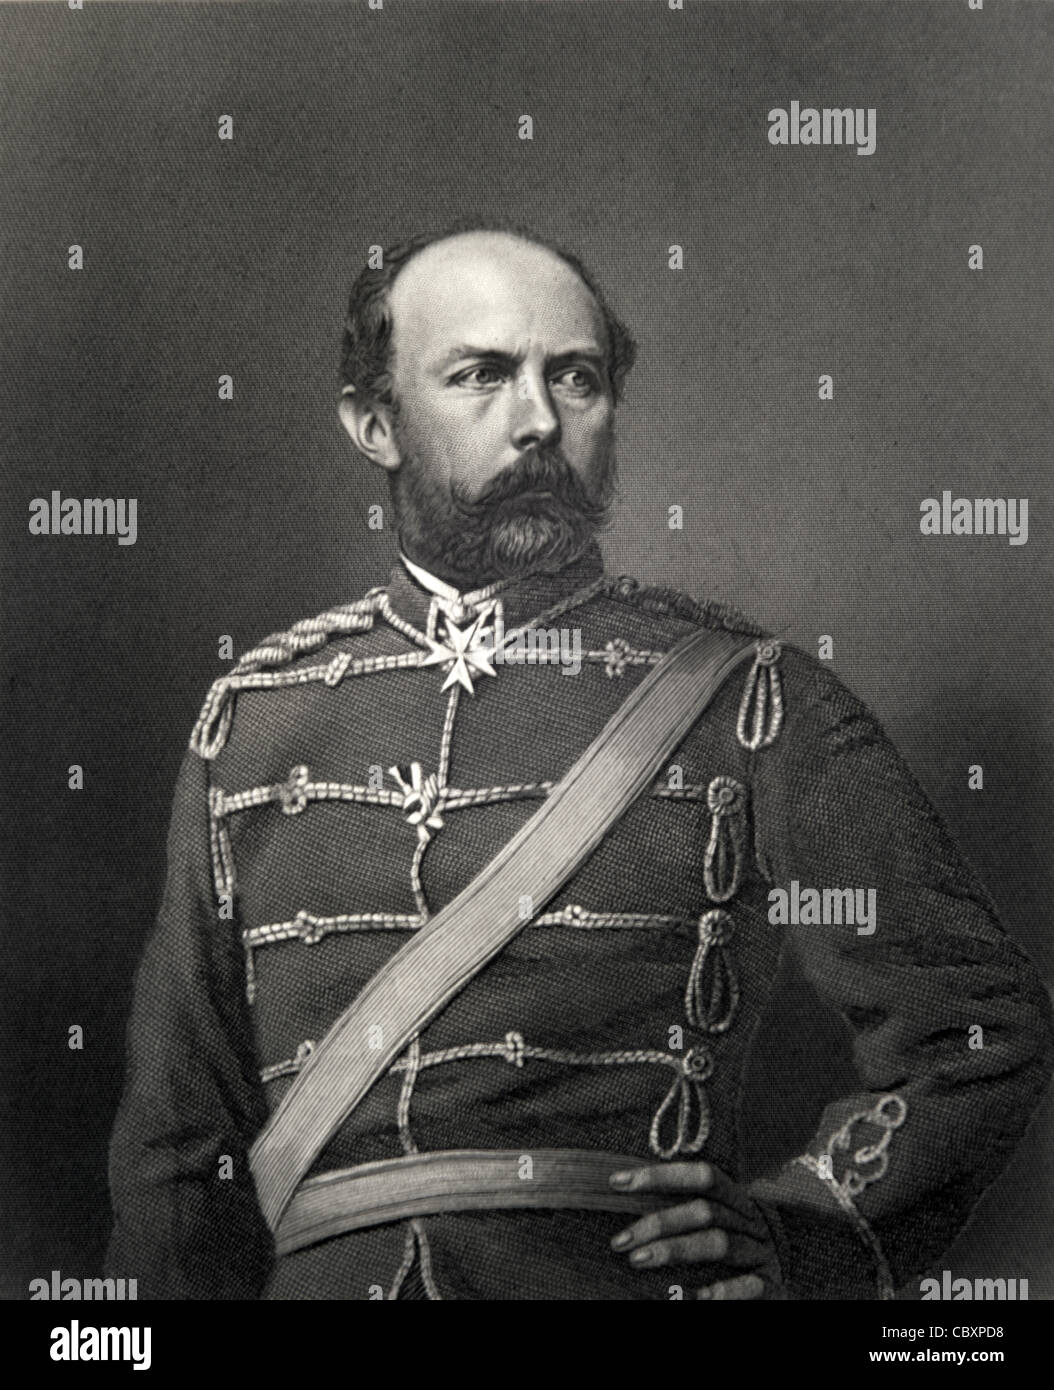 Portrait of Prince Frederick Charles or Prussia, Prince of Prussia (1828-85), The Iron Prince, Prussian Field Marshall. Victor at Battle of Königgrätz in 1866. Vintage Illustration or Engraving Stock Photo